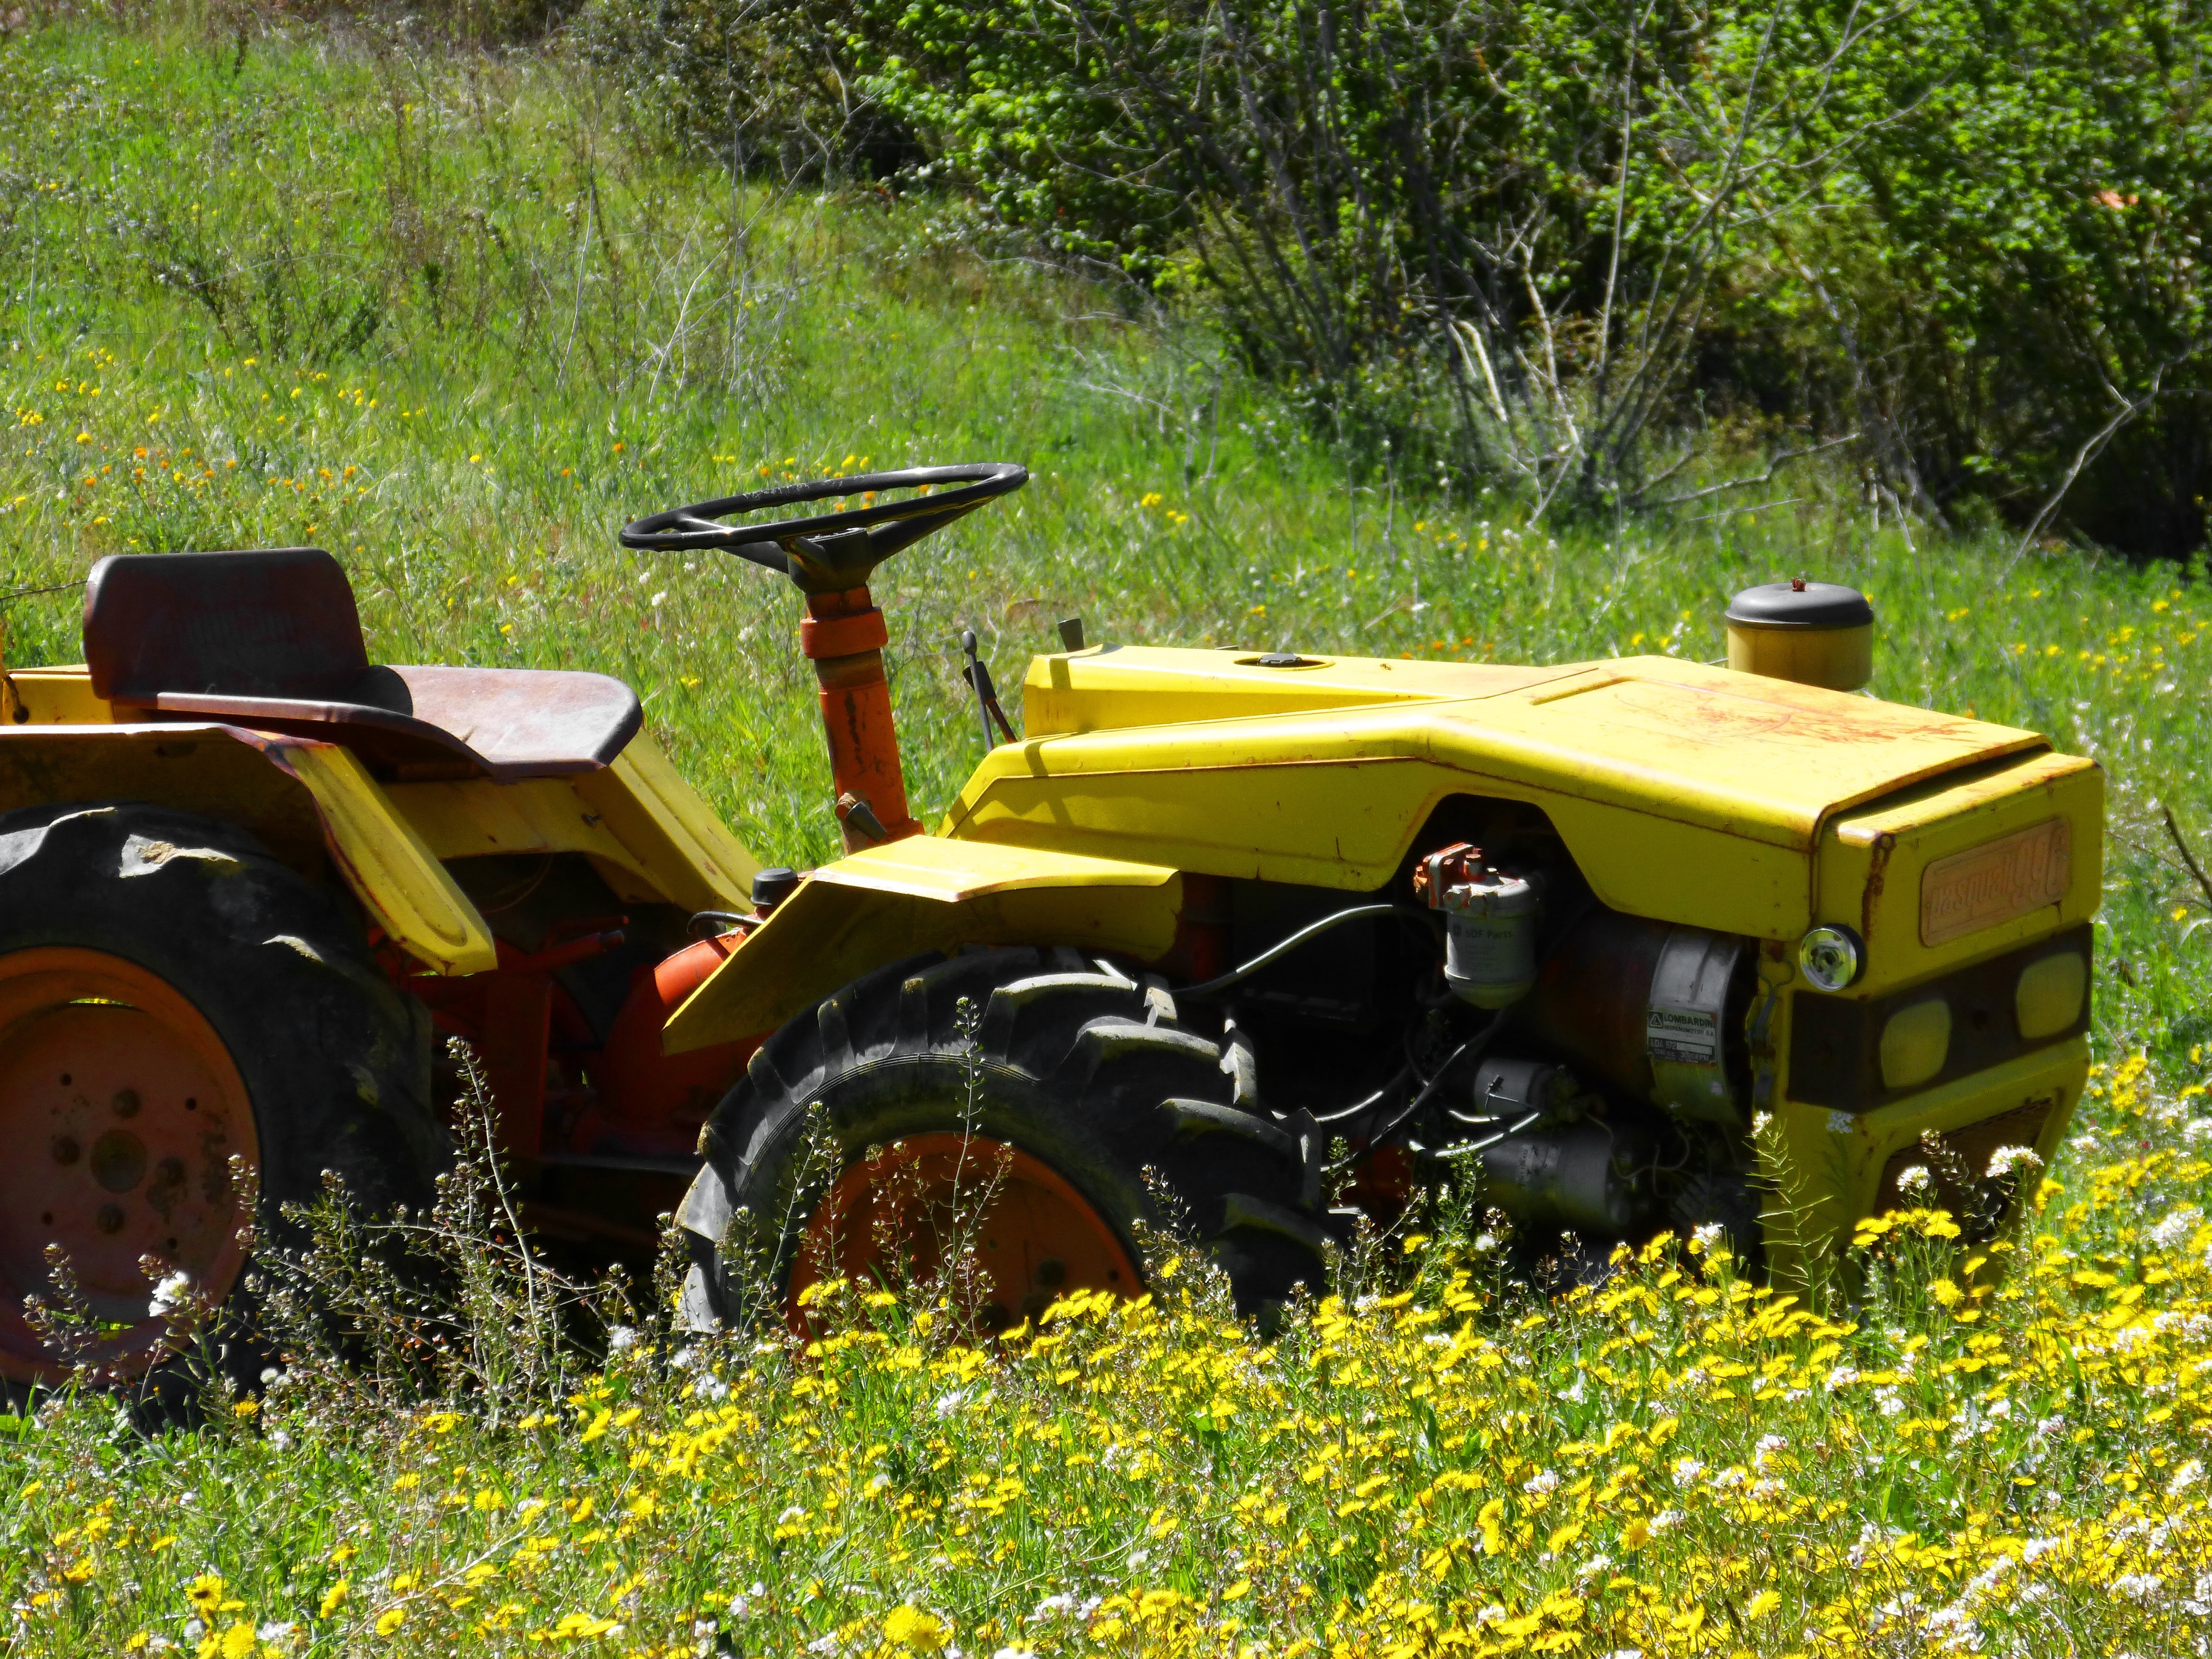 yellow, red, and black tractor in green grass